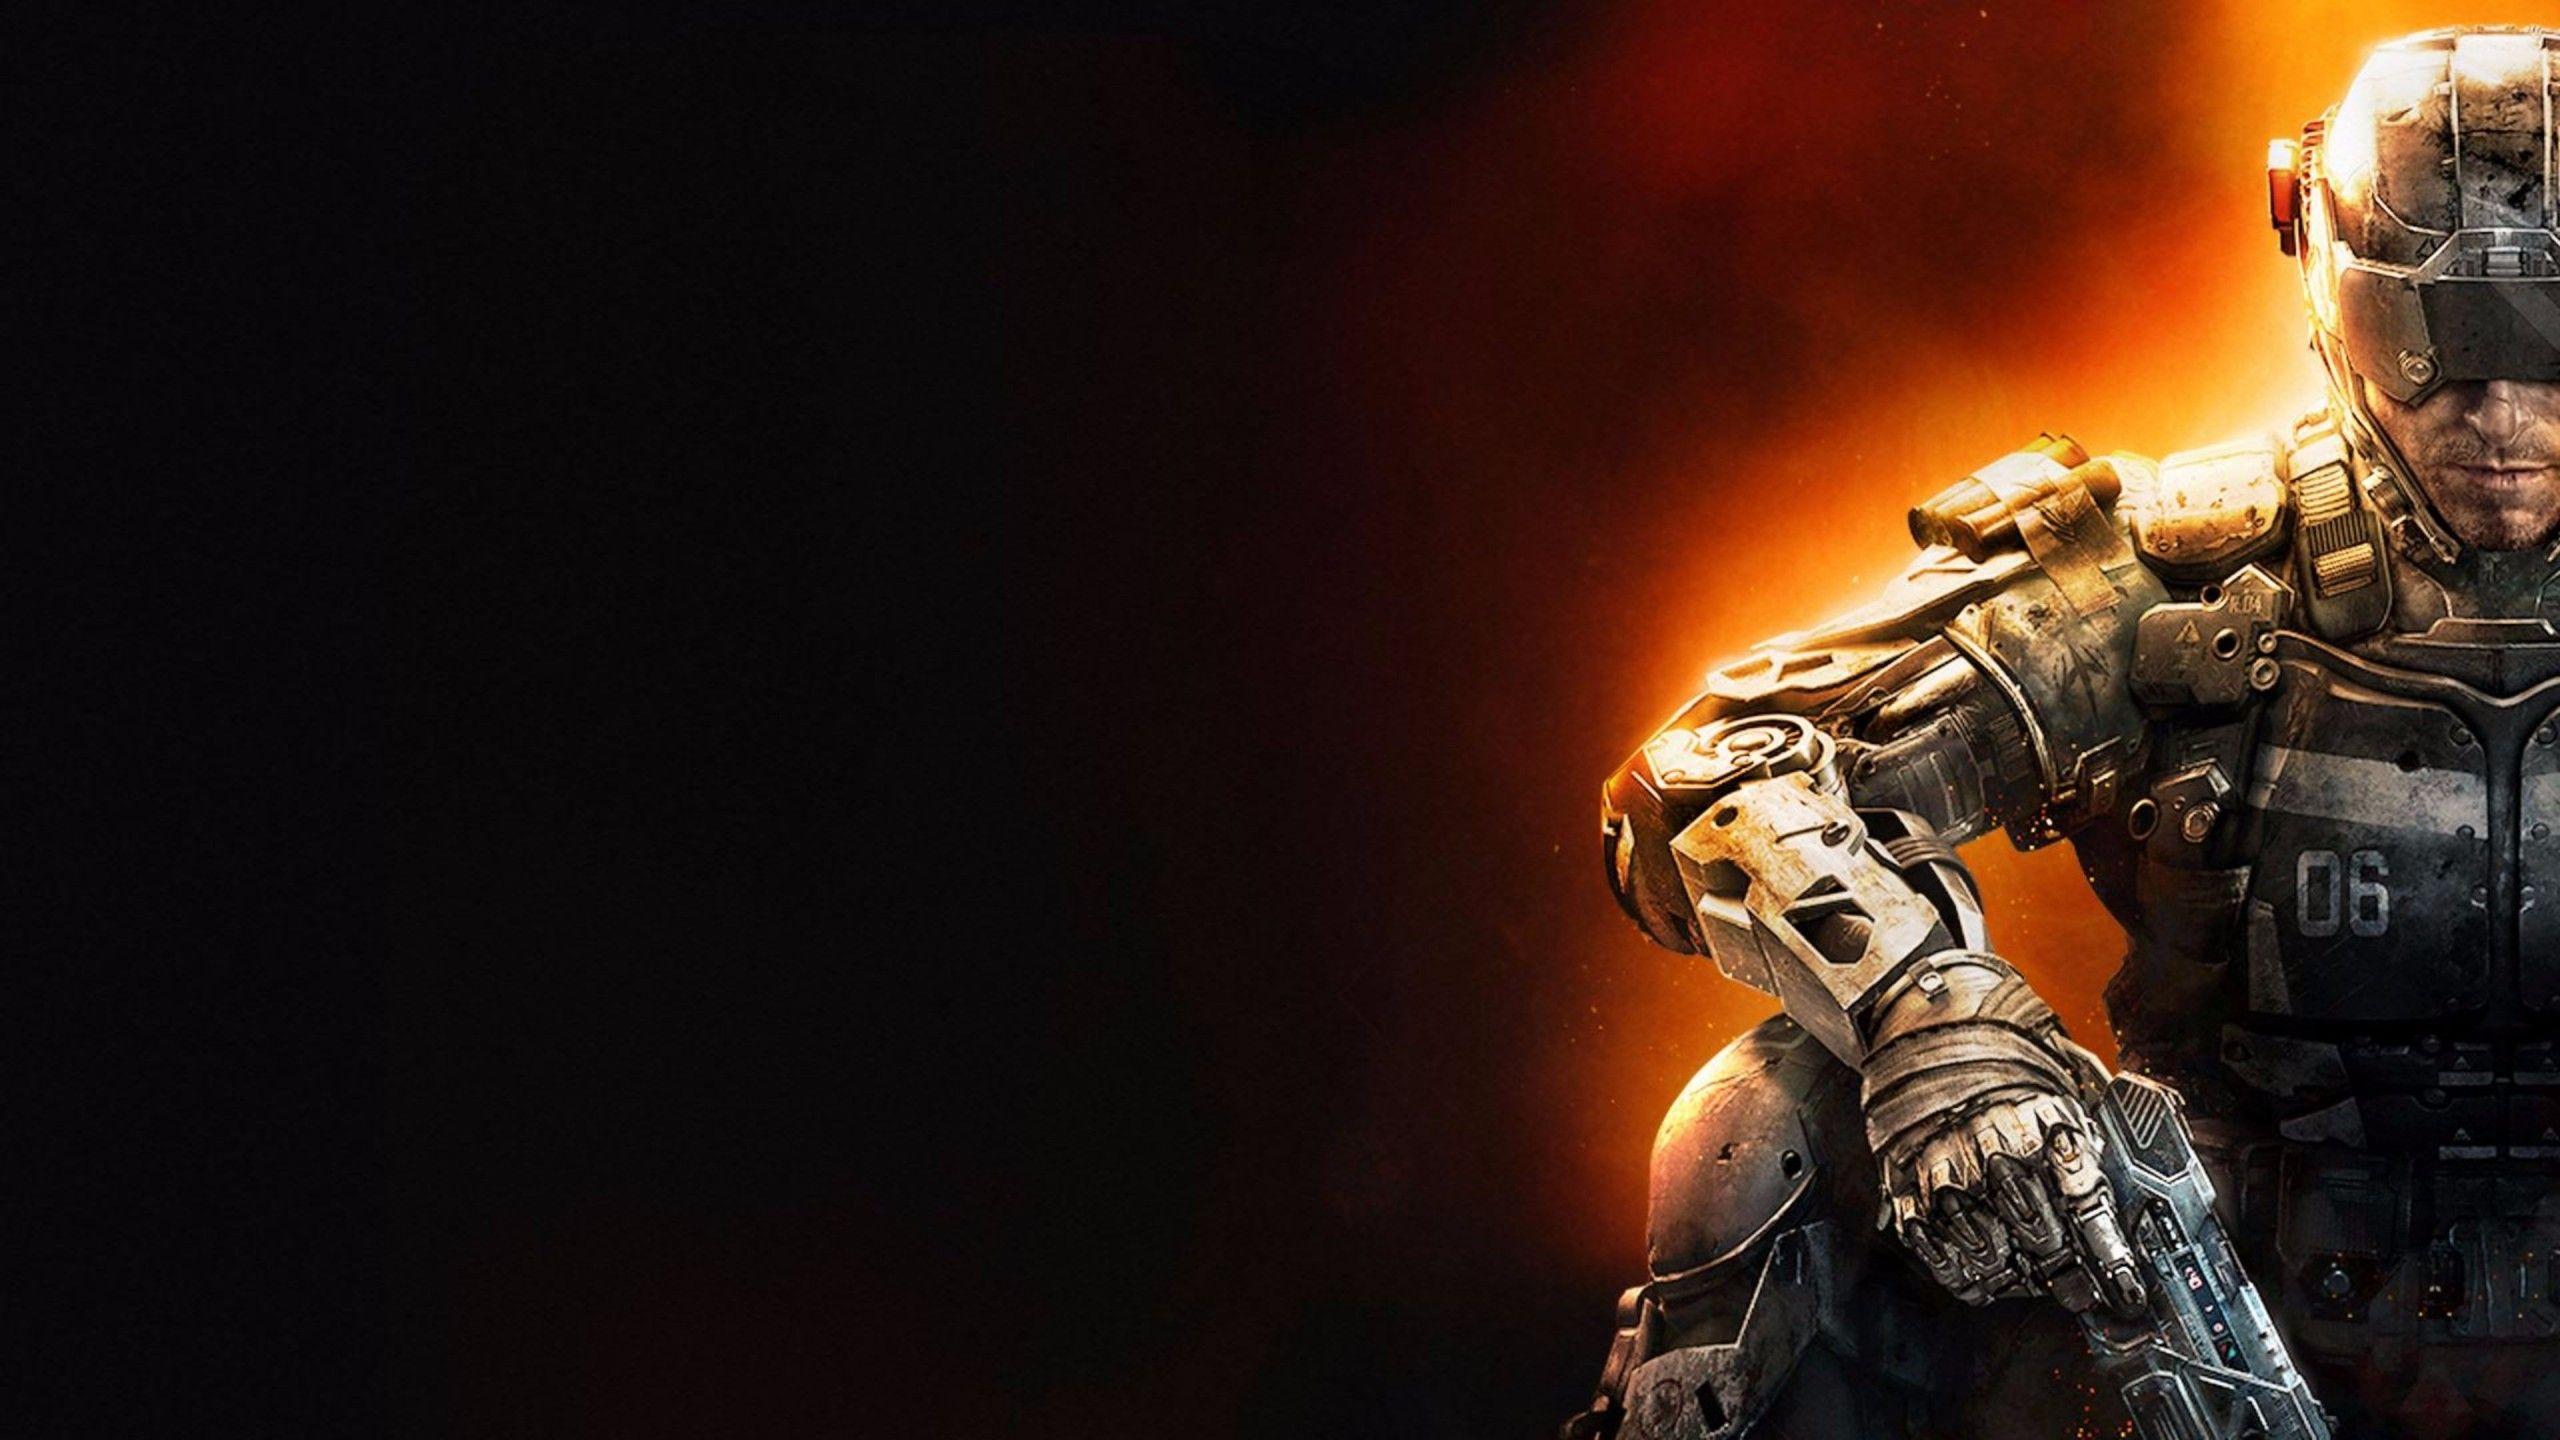 Call Of Duty: Black Ops 3 HD Wallpaper Free Download Nice call